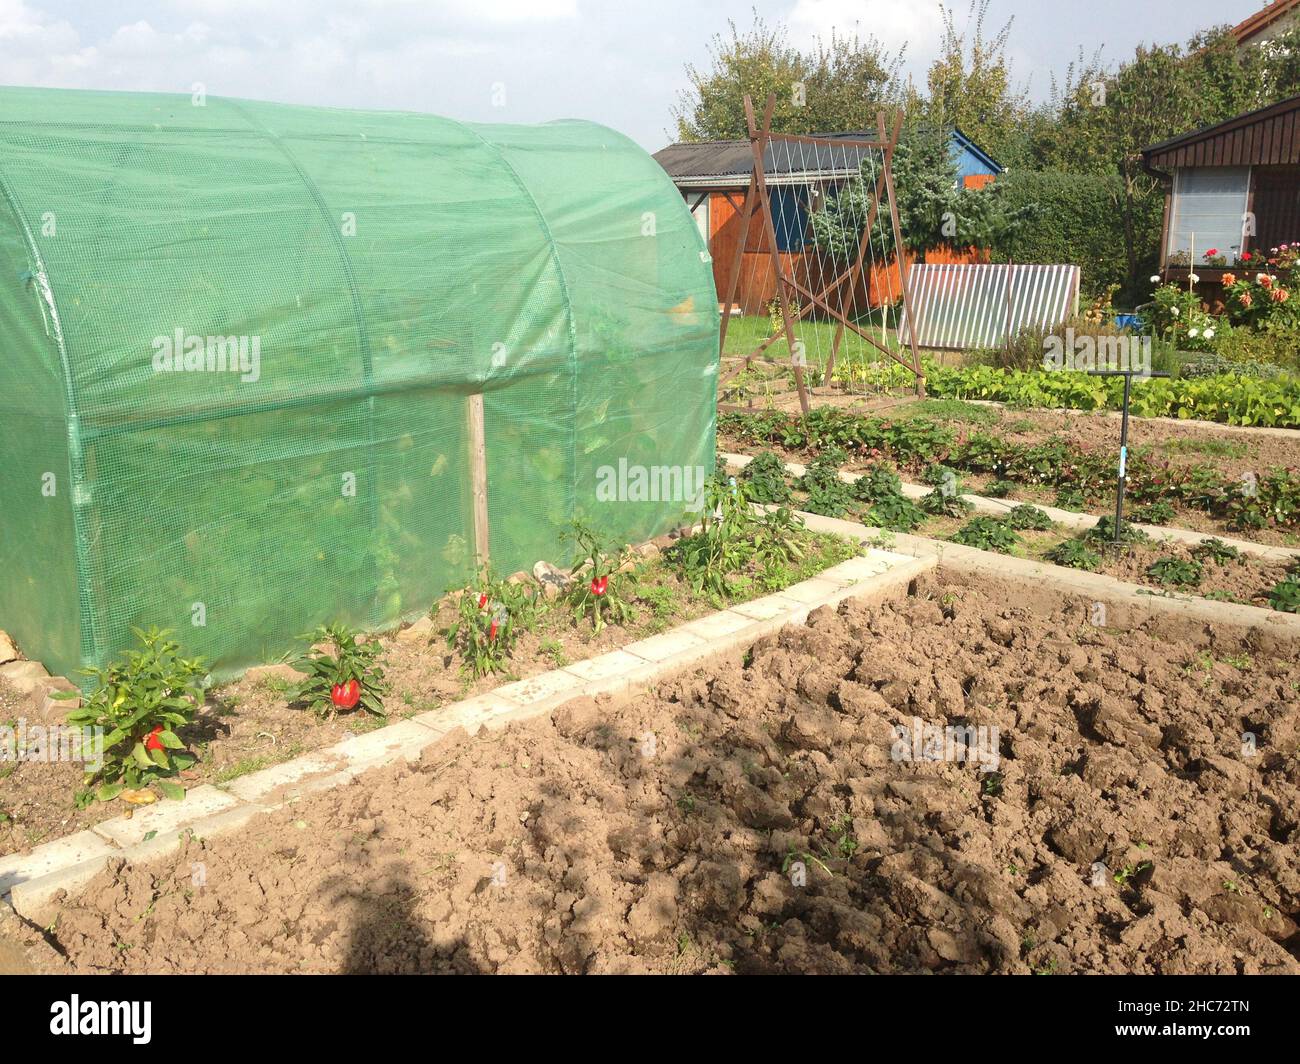 Greenhouse near the ground in the summertime. Stock Photo